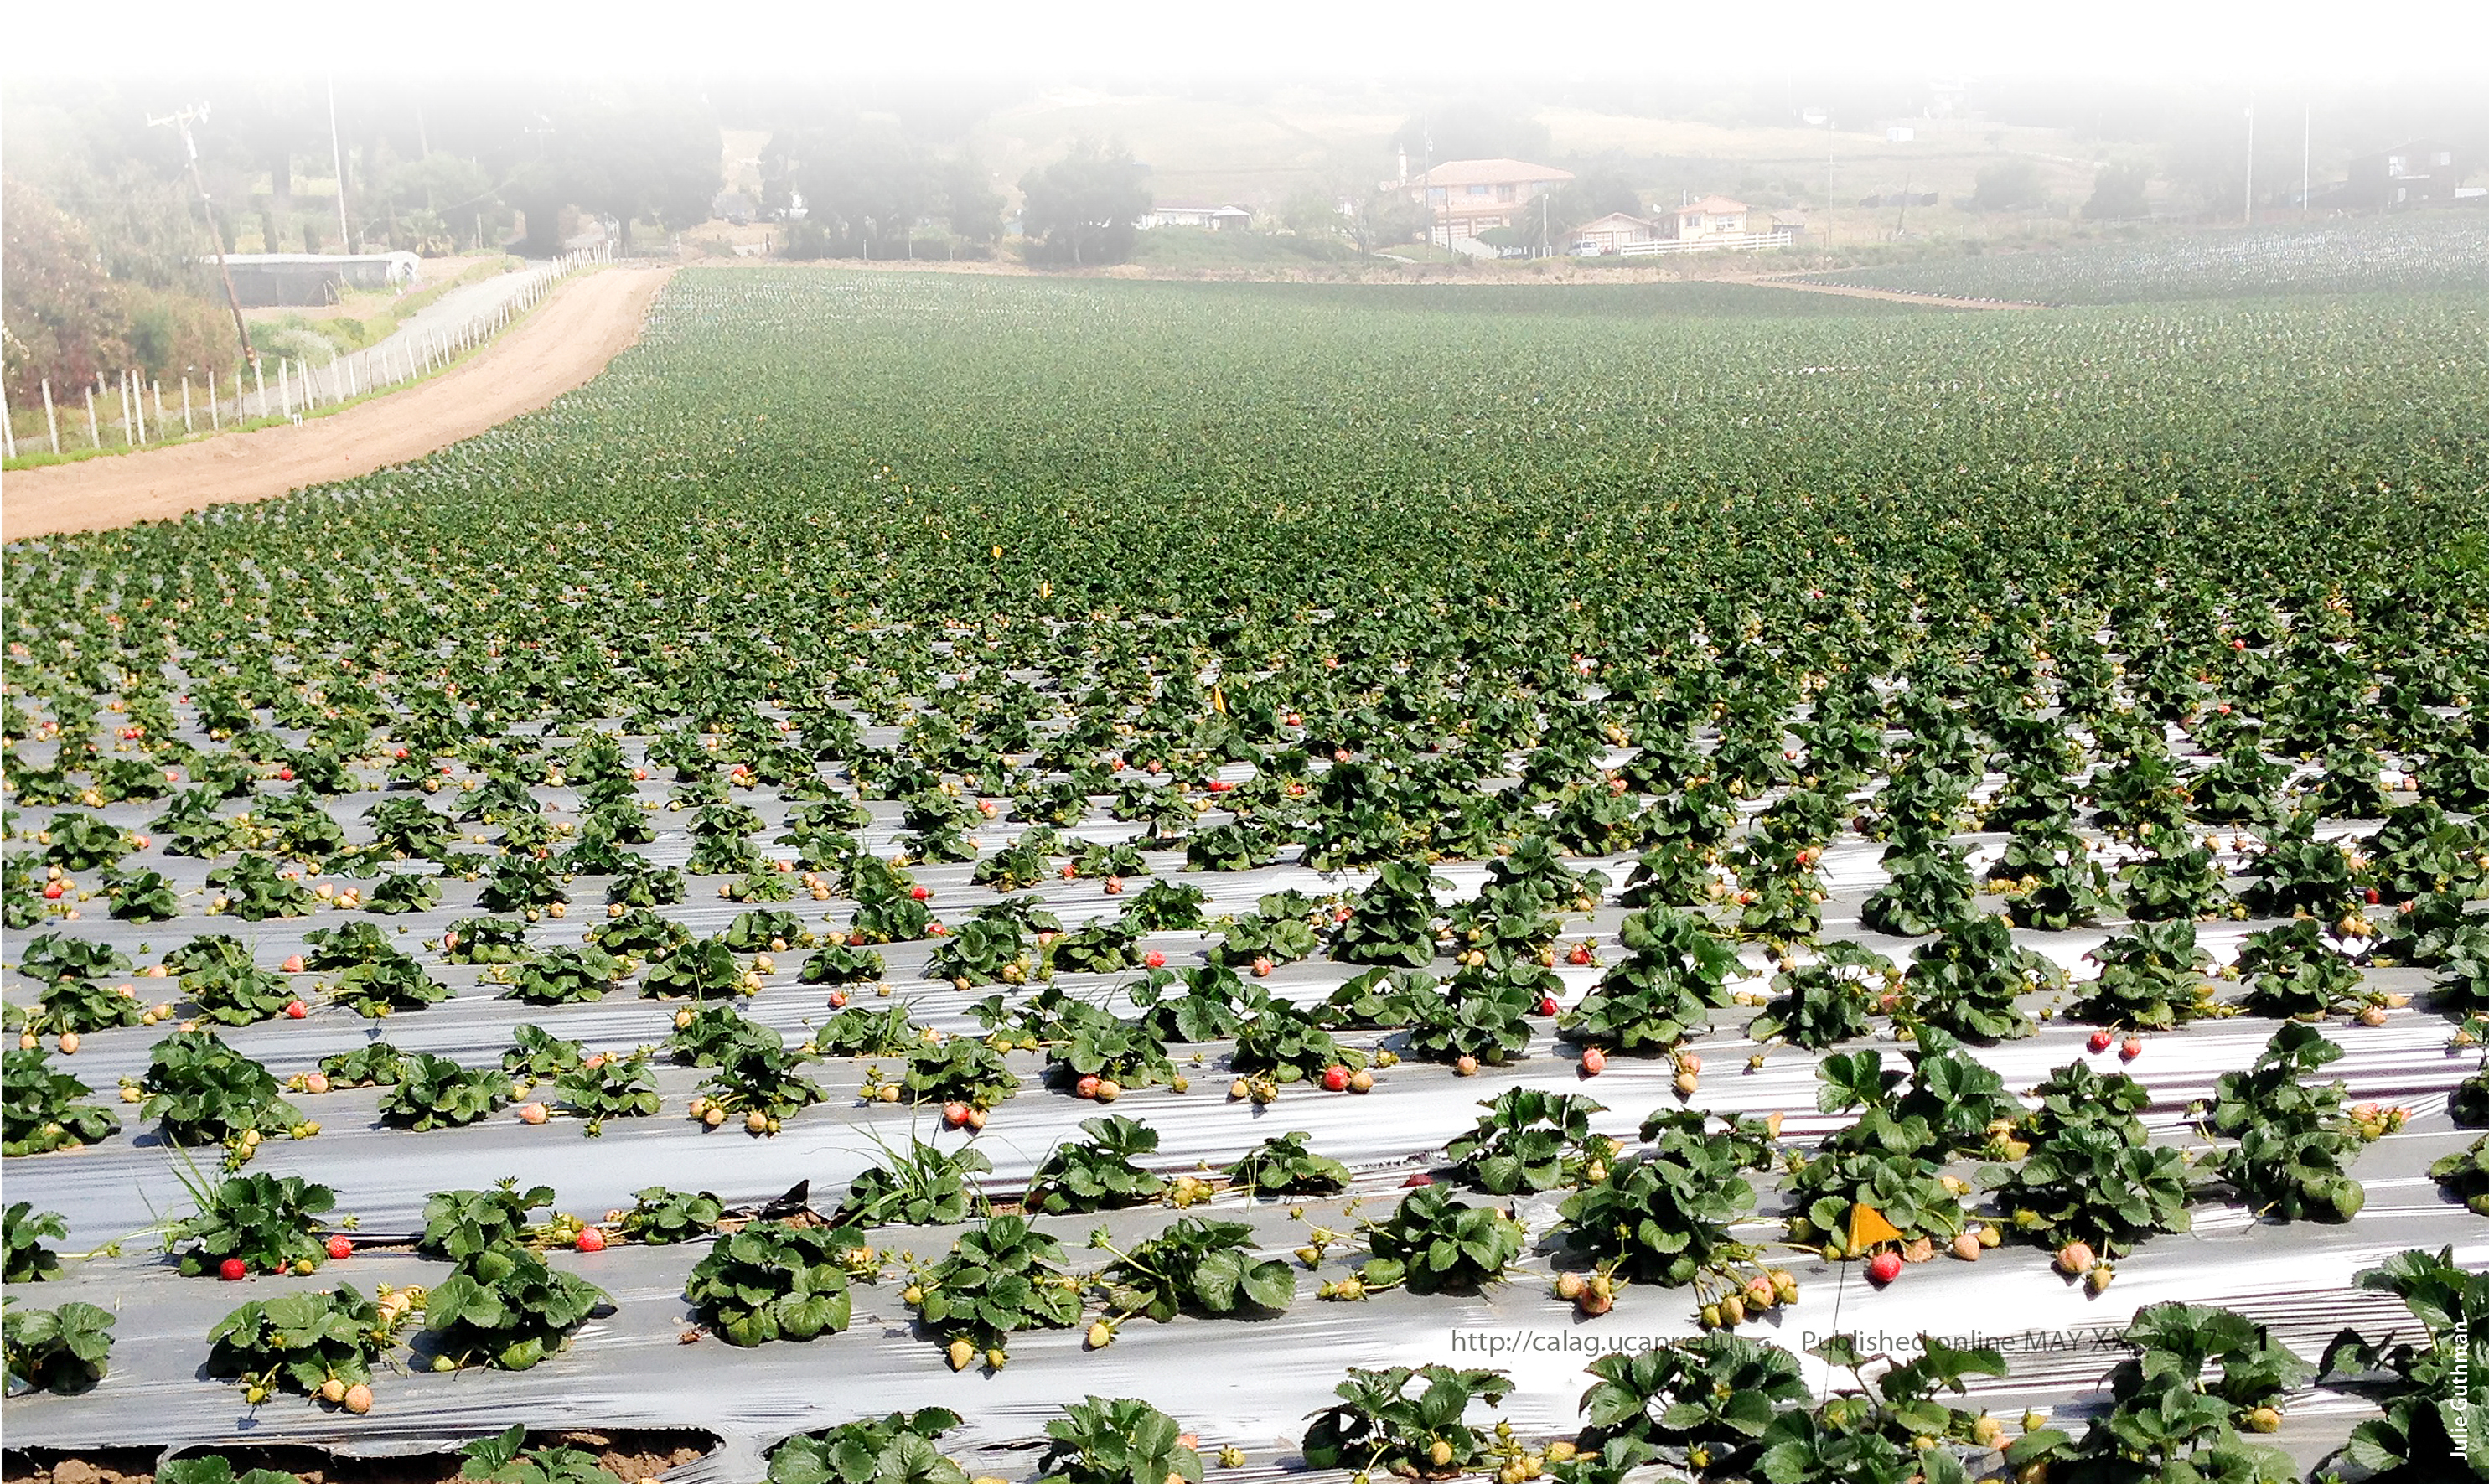 As methyl bromide use declined during the phaseout period, most of the California strawberry growers surveyed increased their use of alternative fumigants such as chloropicrin.